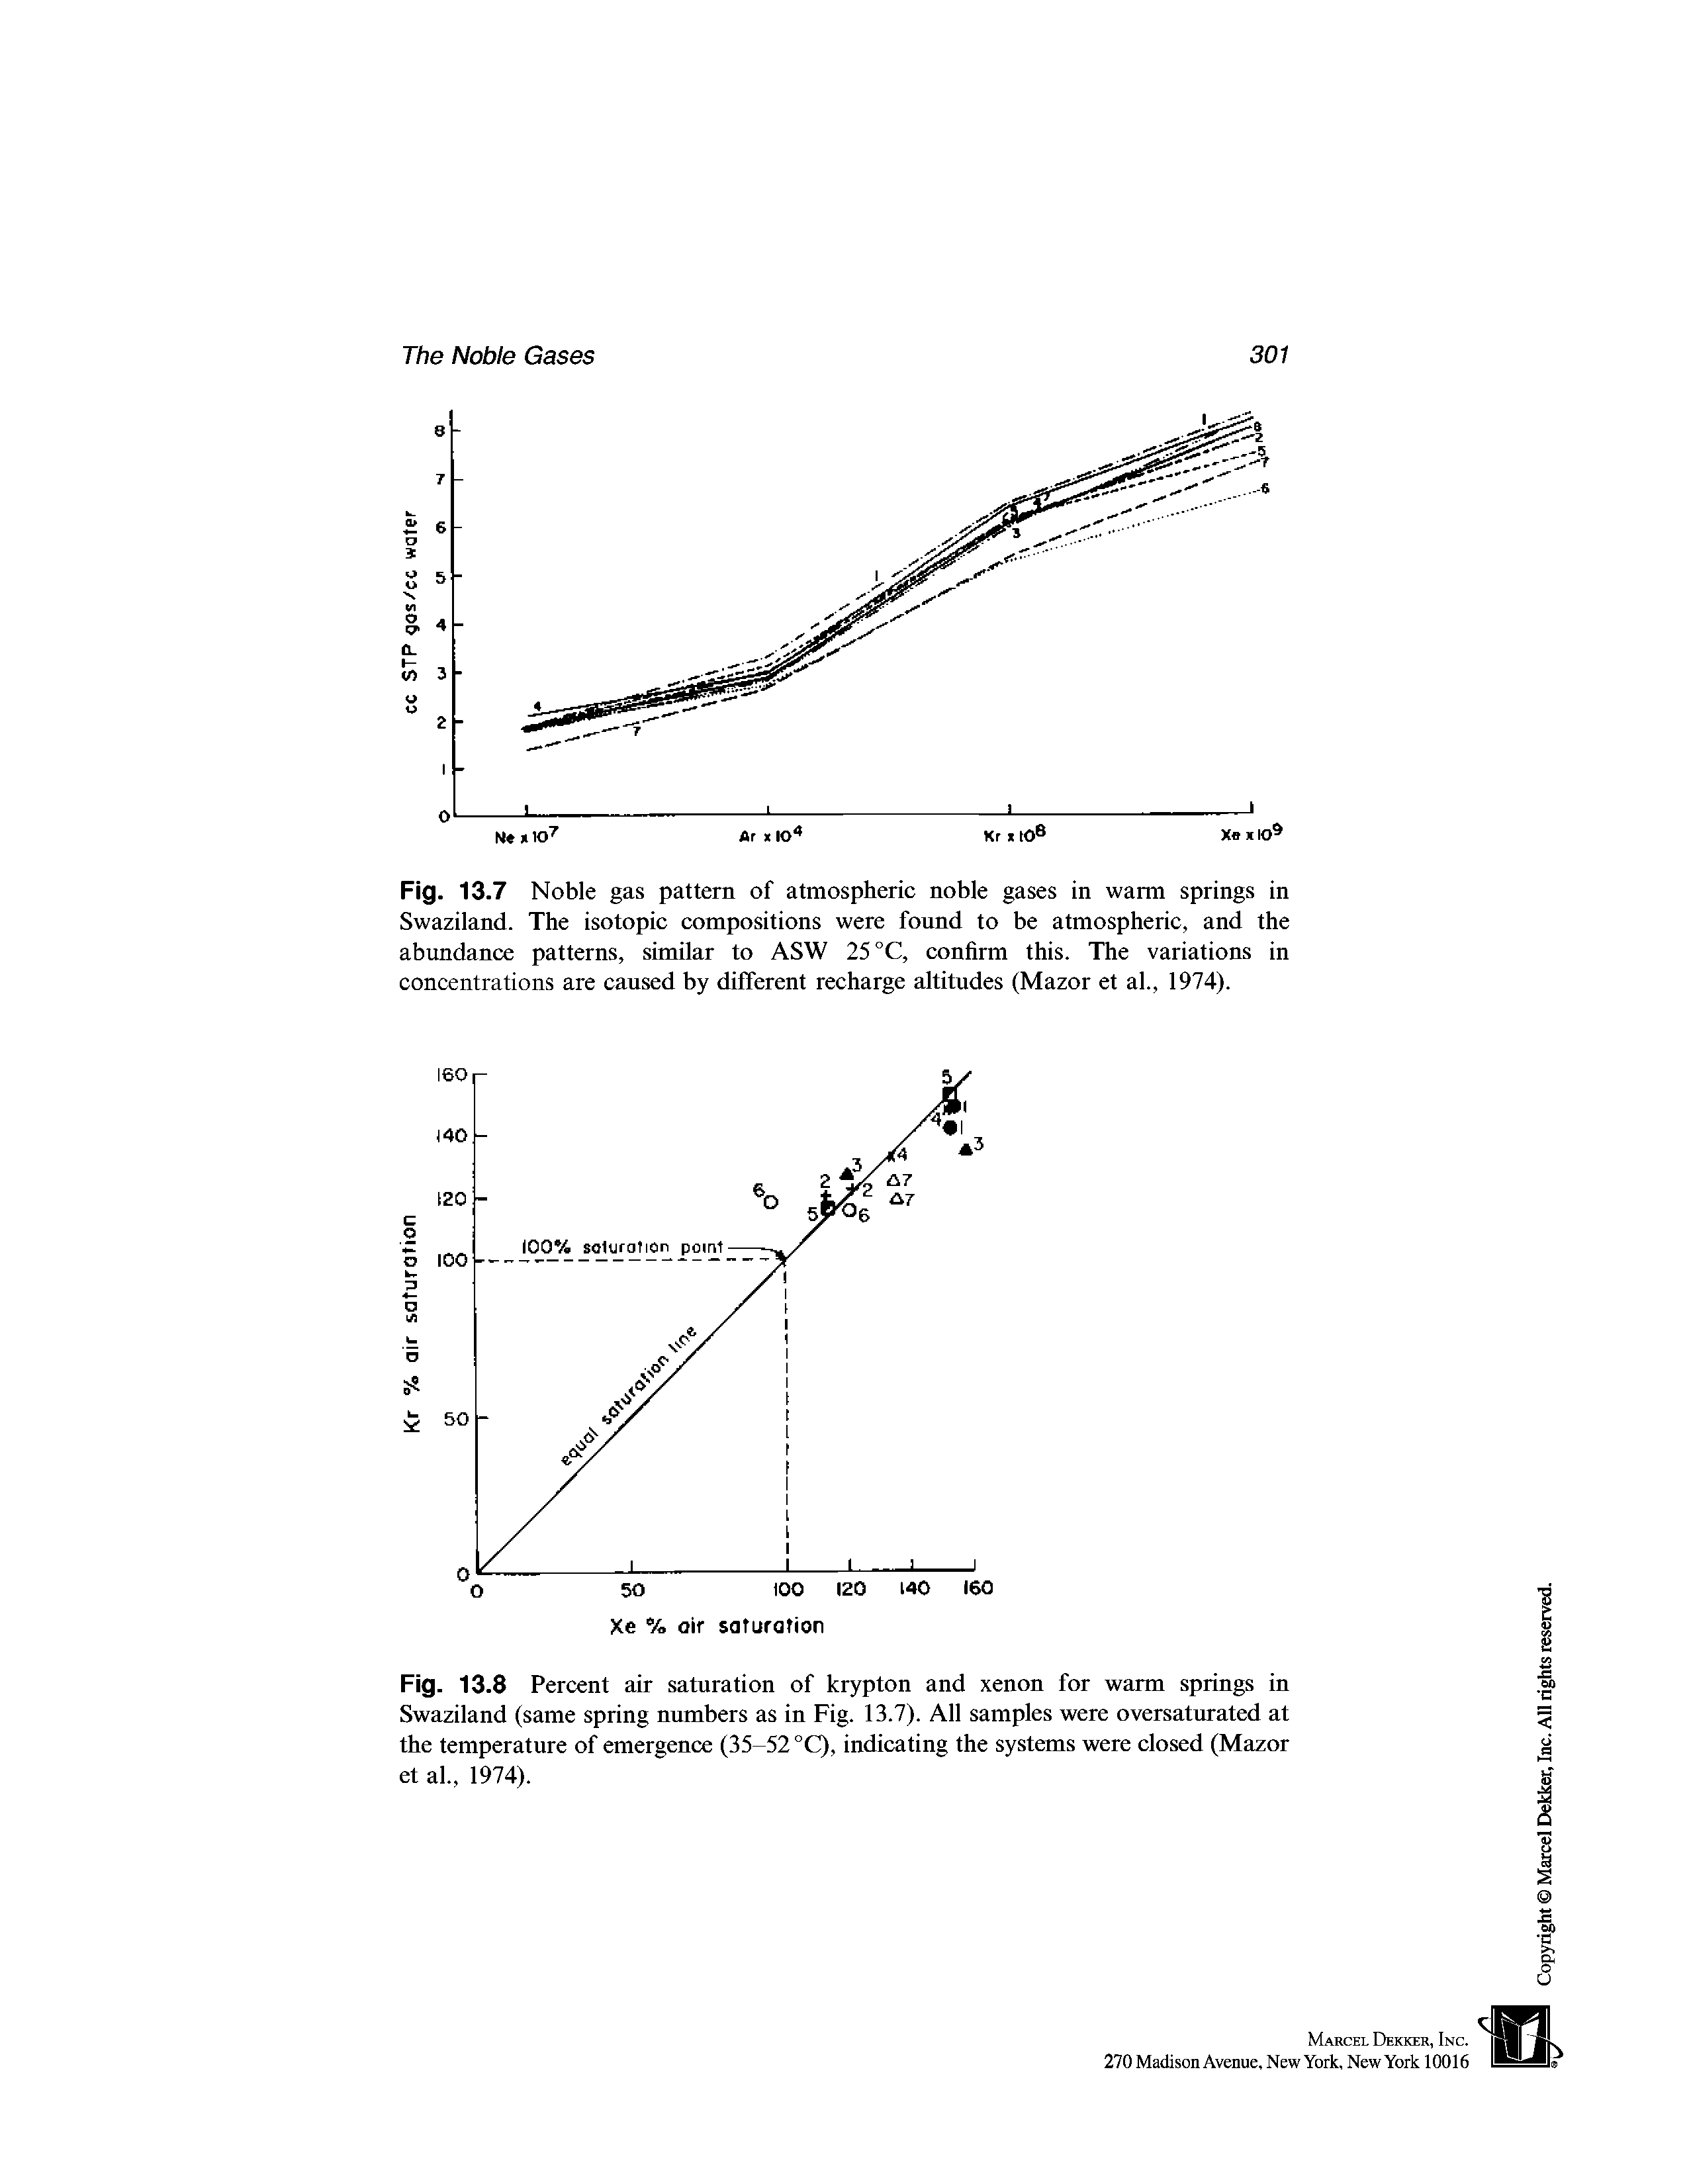 Fig. 13.8 Percent air saturation of krypton and xenon for warm springs in Swaziland (same spring numbers as in Fig. 13.7). All samples were oversaturated at the temperature of emergence (35-52 °Q, indicating the systems were closed (Mazor et al., 1974).